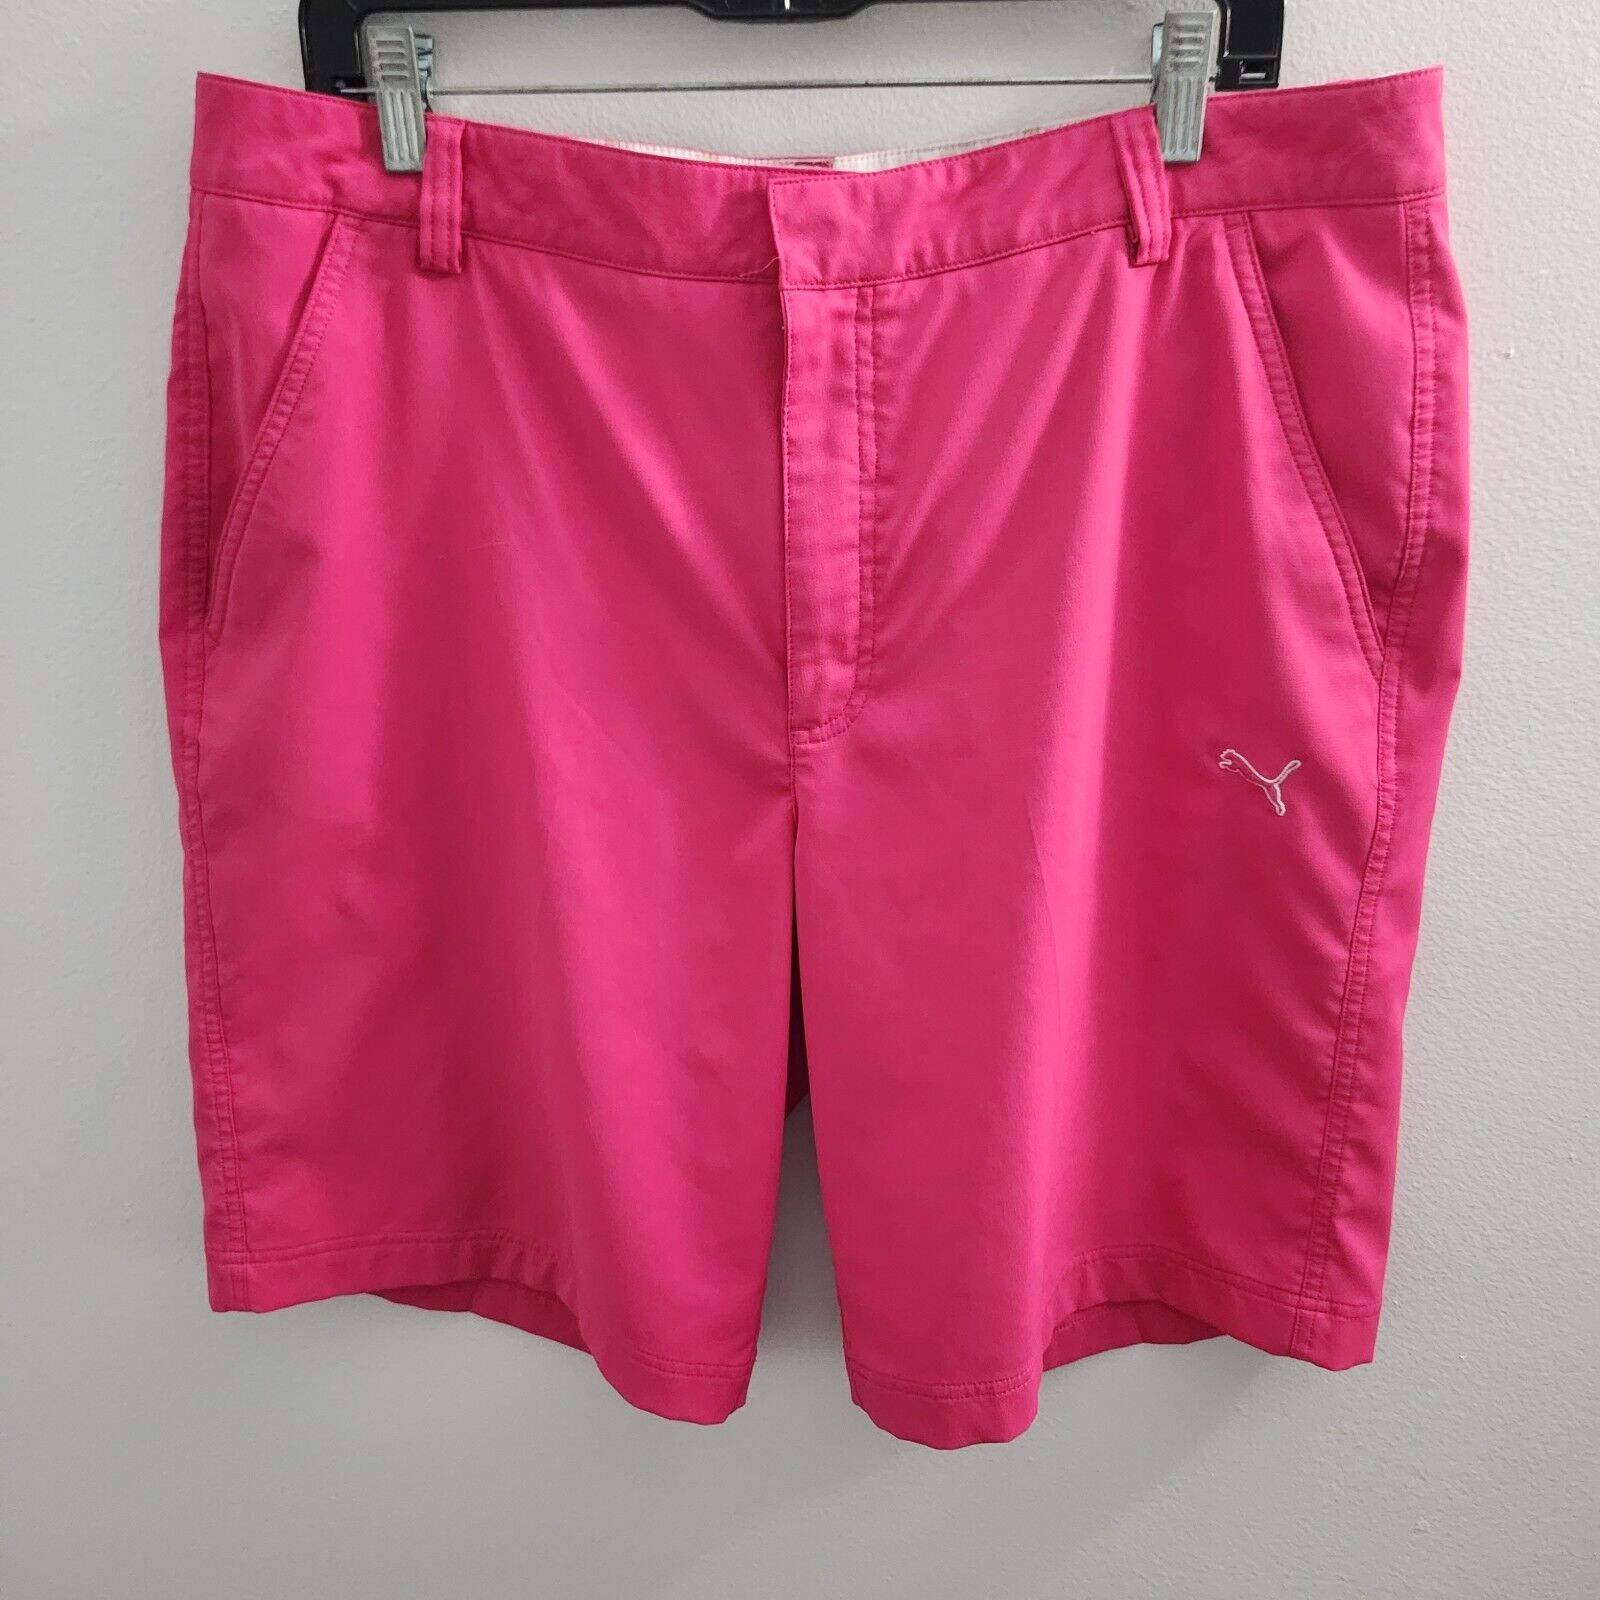 Puma Dry Cell Athletic Lightweight Golf Shorts Neon Pink Men’s 36